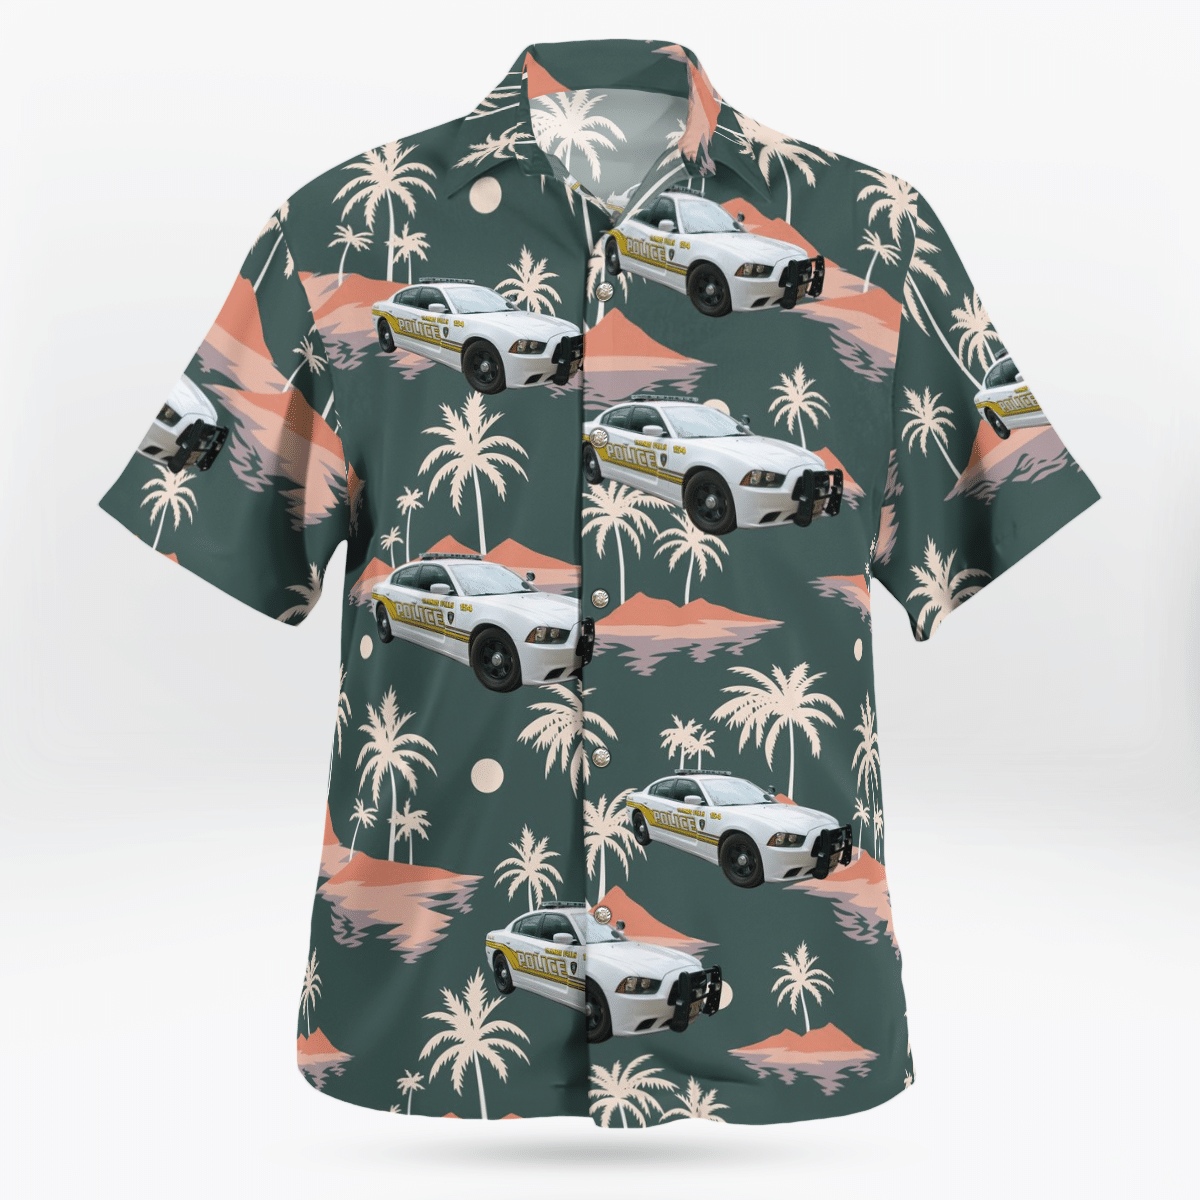 Hawaiian shirts never go out of style 134